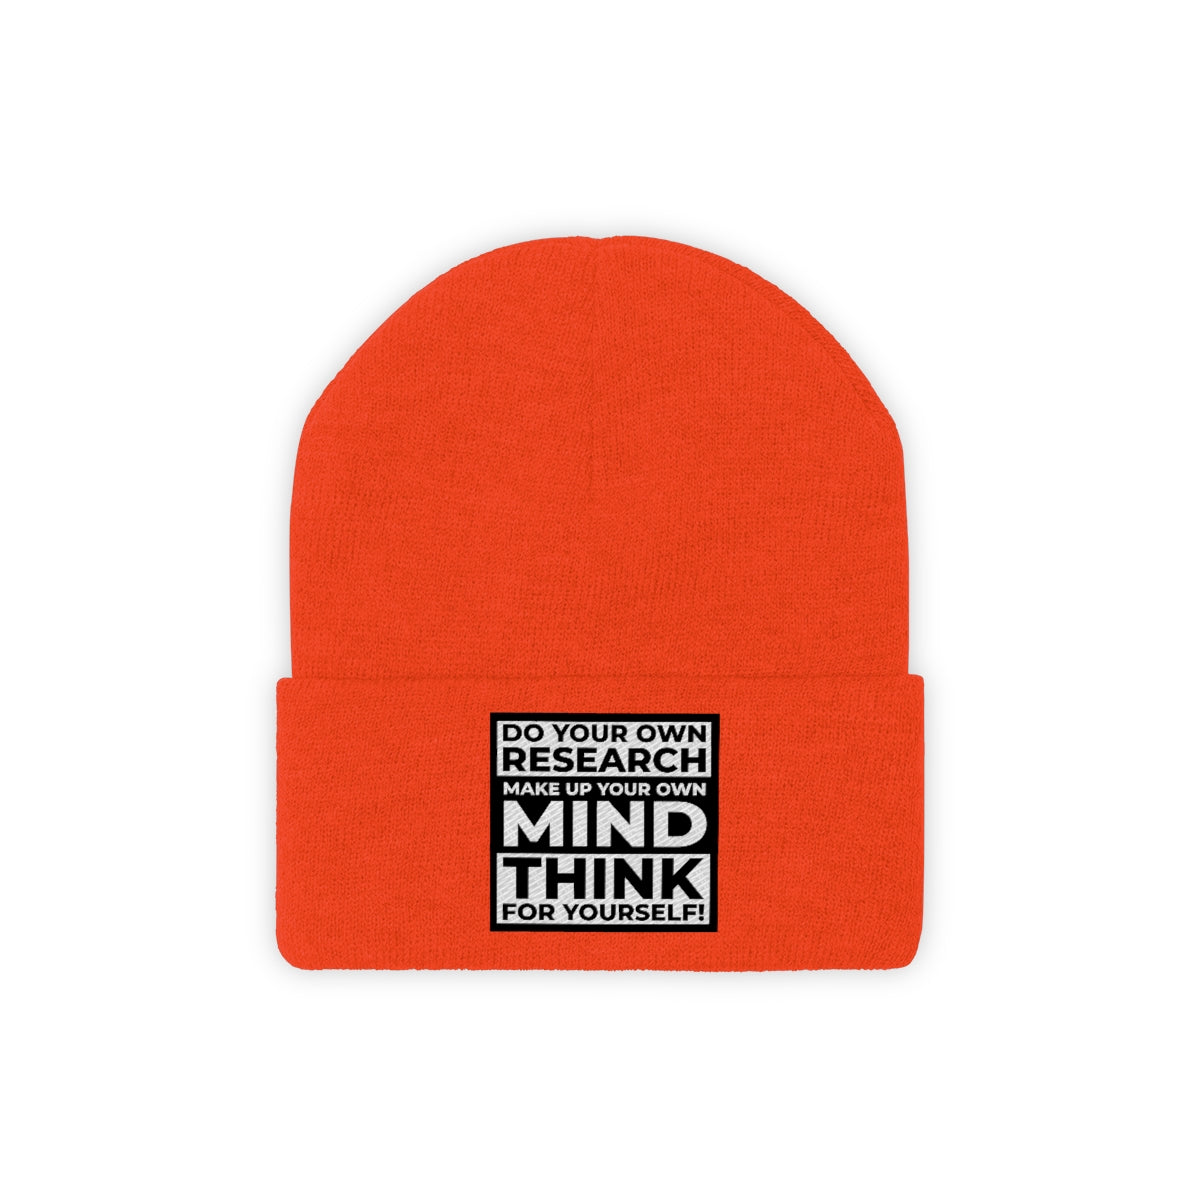 'Think for Yourself' Knit Beanie